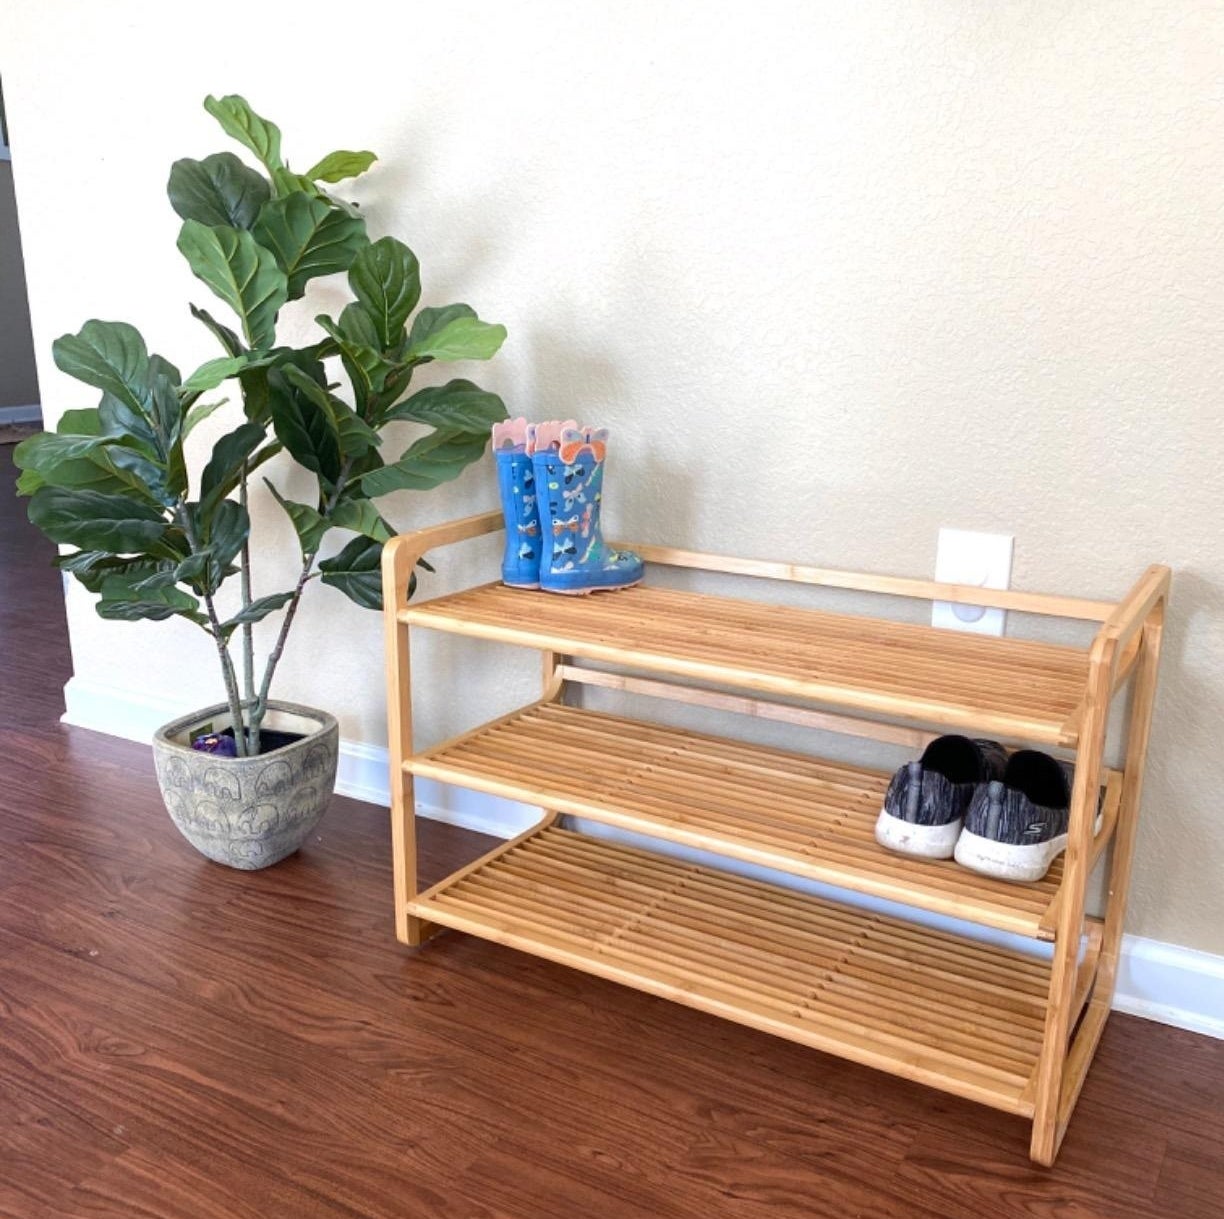 a reviewer photo of the shoe rack with shoes on it